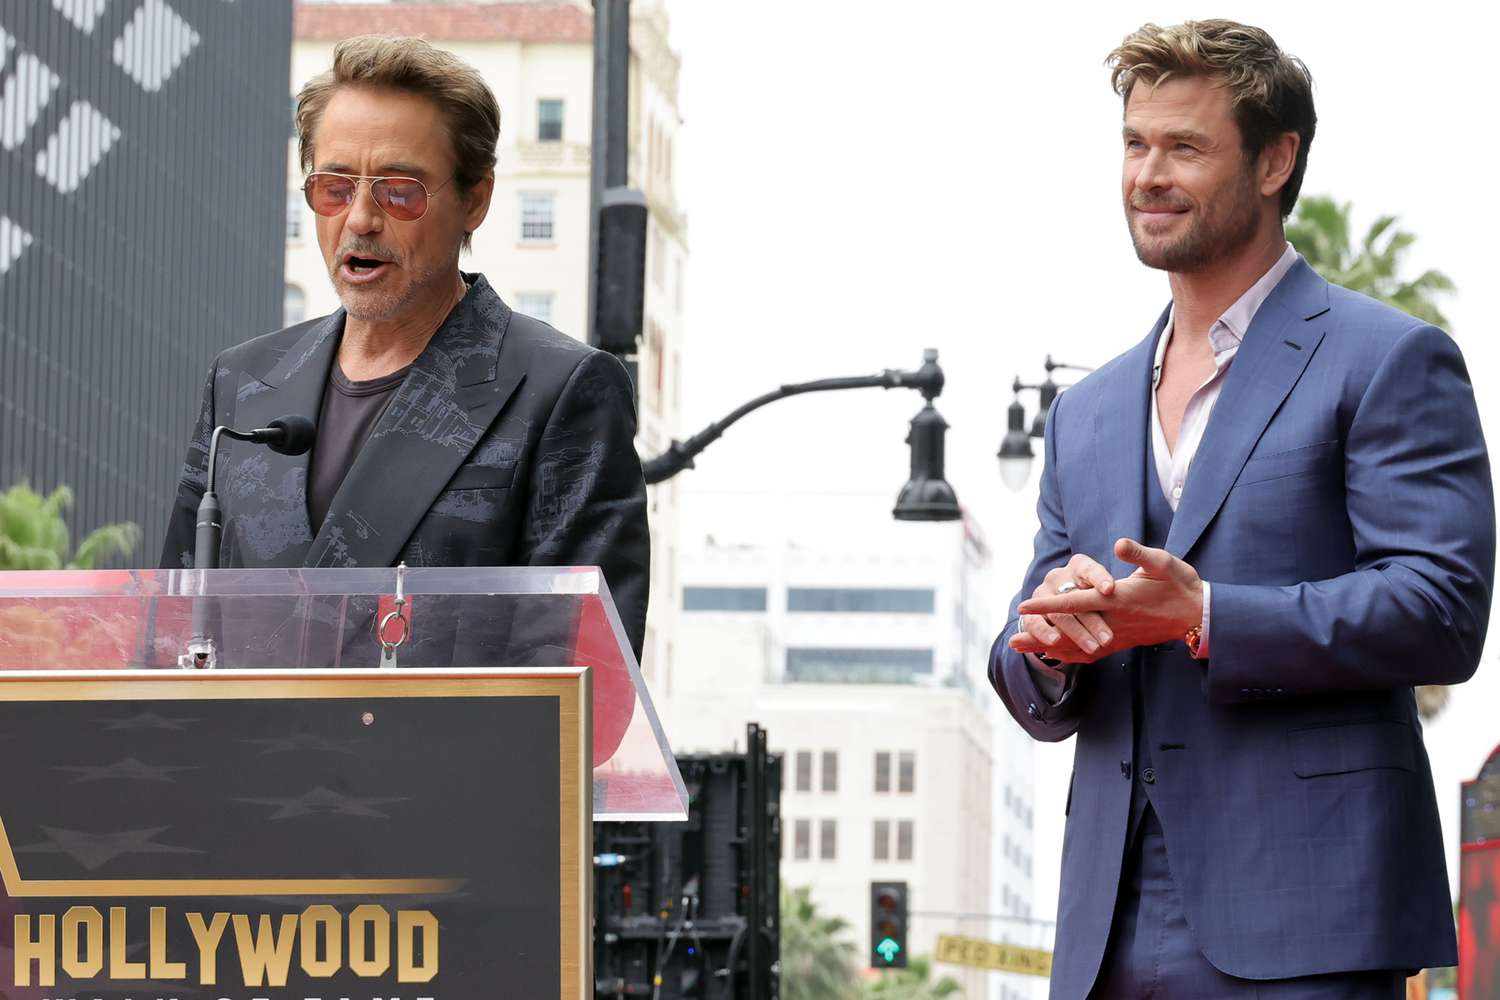 Robert Downey Jr. Roasts Chris Hemsworth as the 'Second-Best Chris' in Funny Walk of Fame Tribute